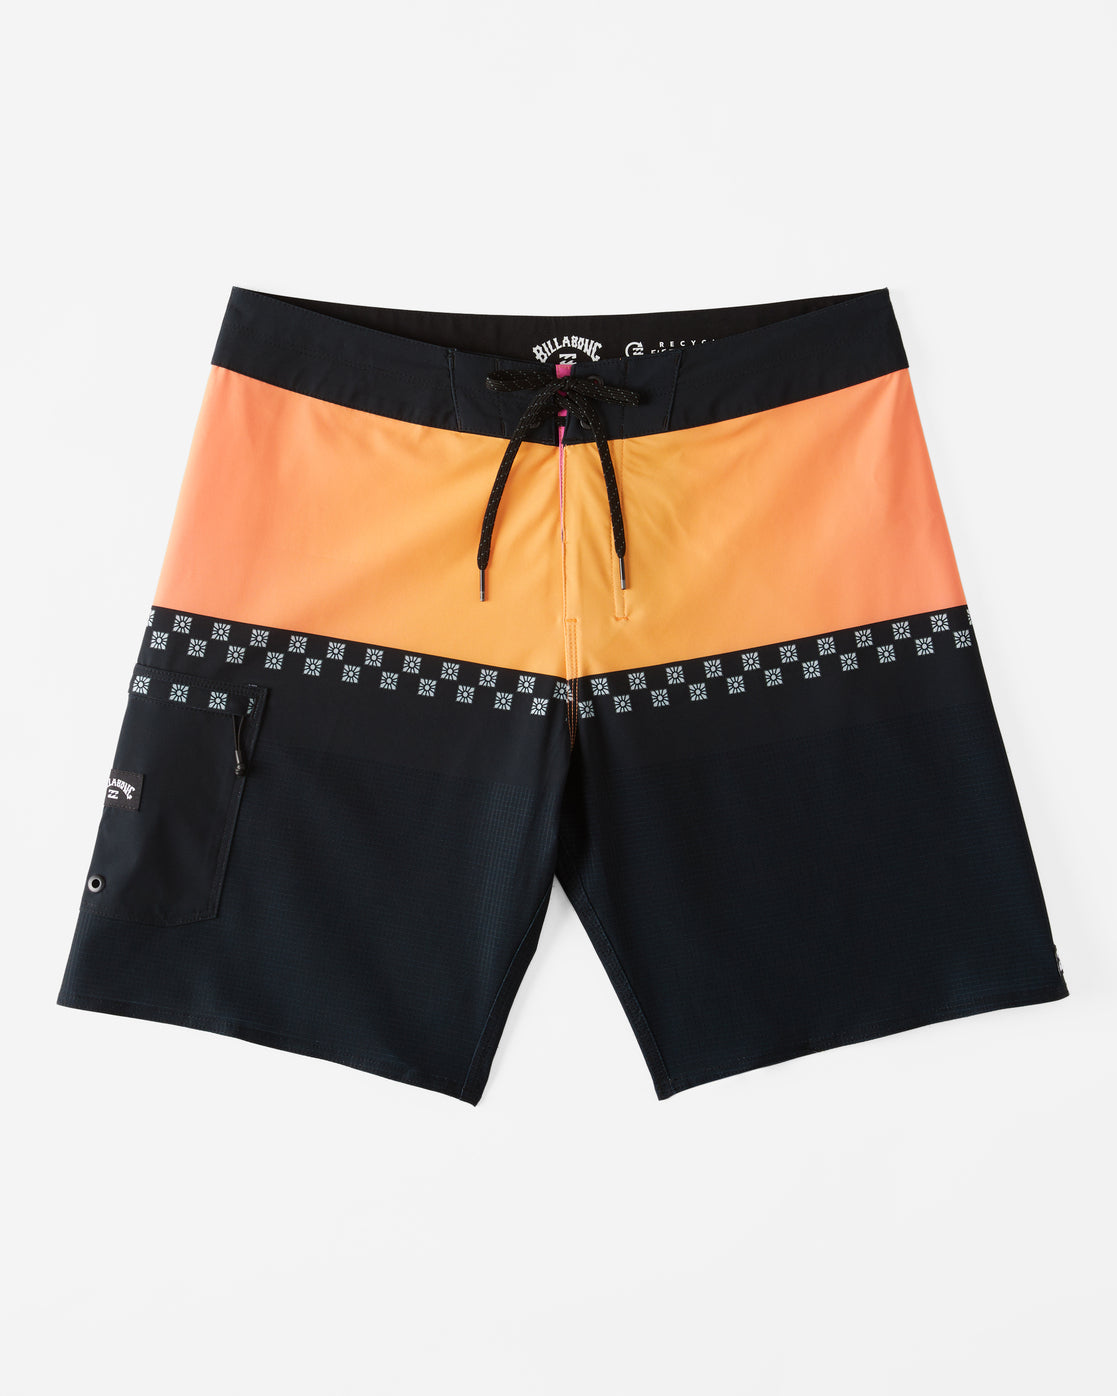 Fifty50 Airlite 19 Boardshorts - Black